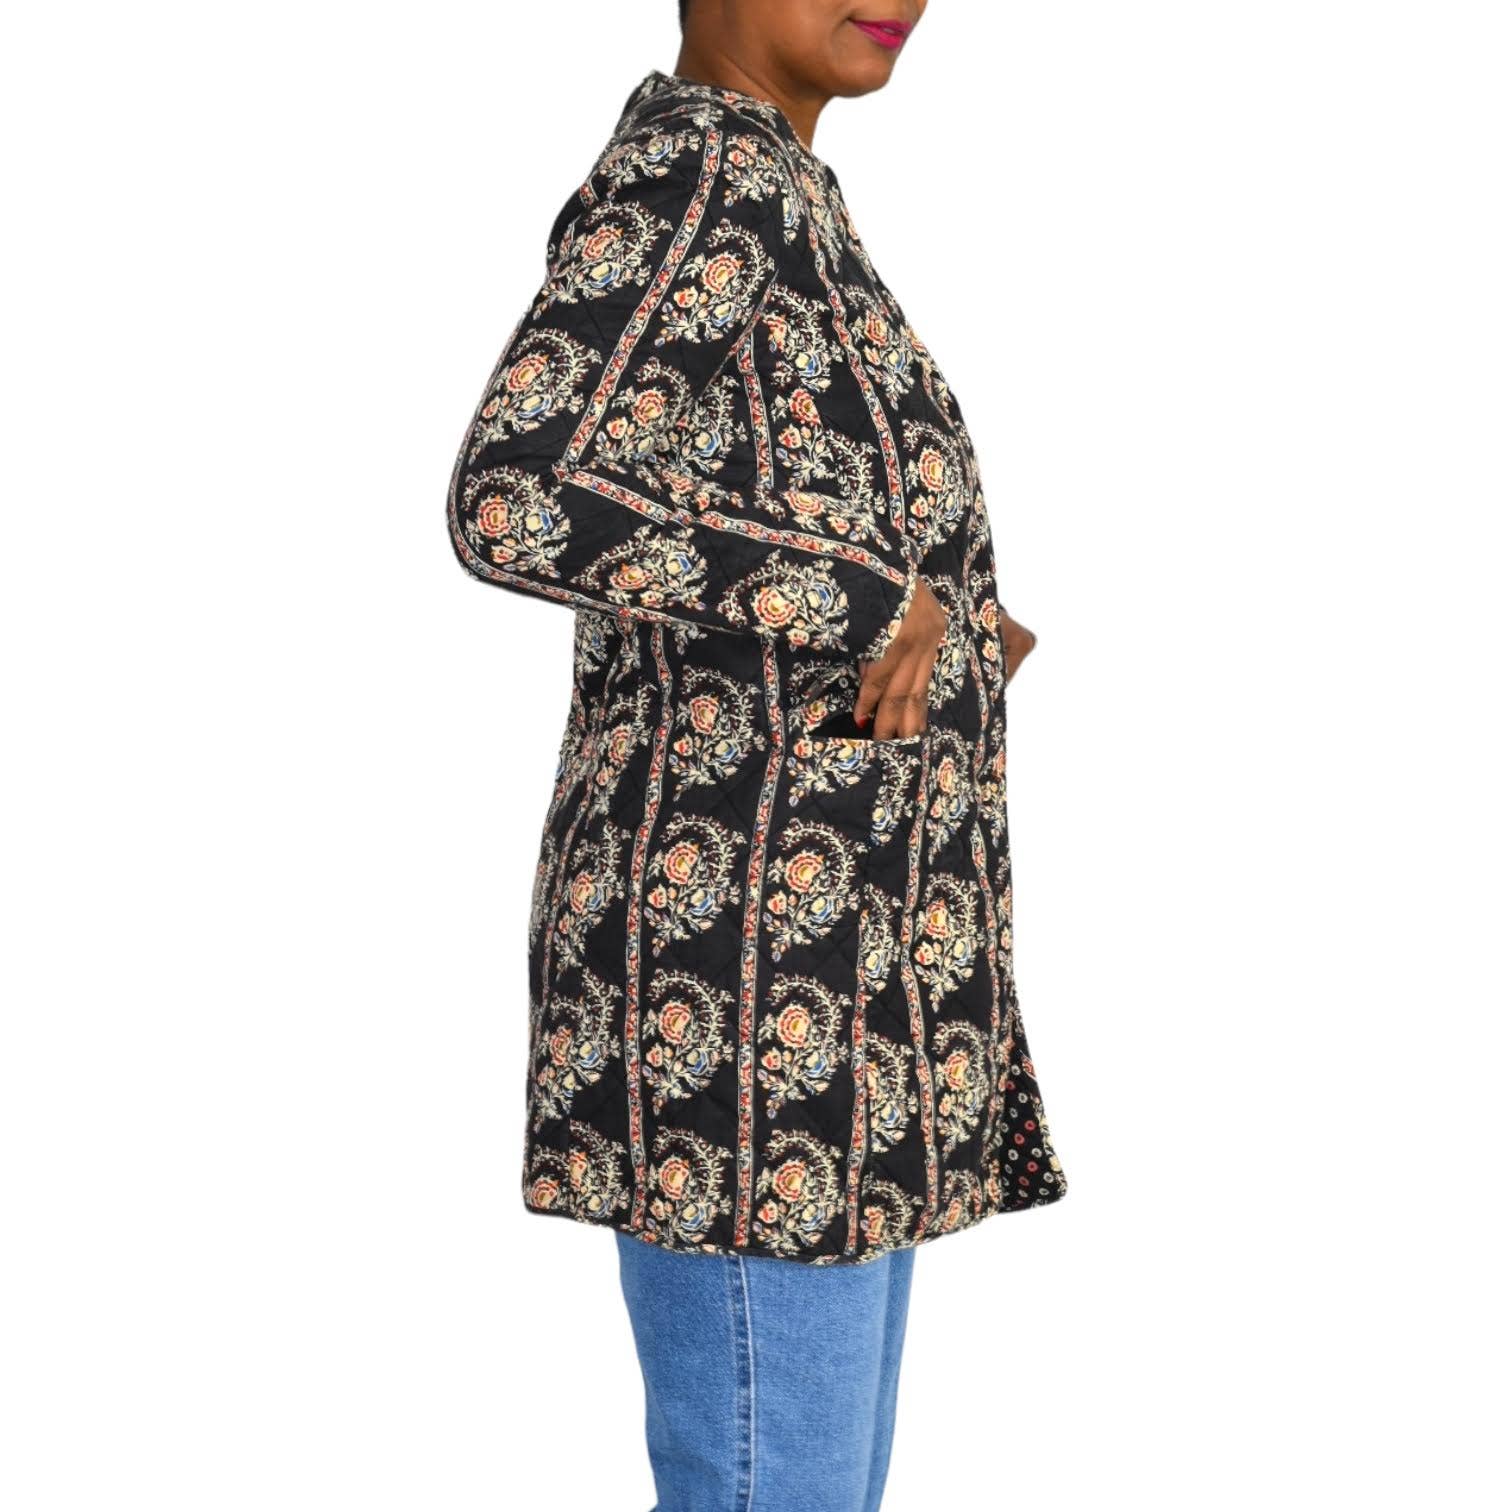 Isabel Marant Etoile Erri Quilted Reversible Coat Cotton Collarless Floral Jacket Size Small